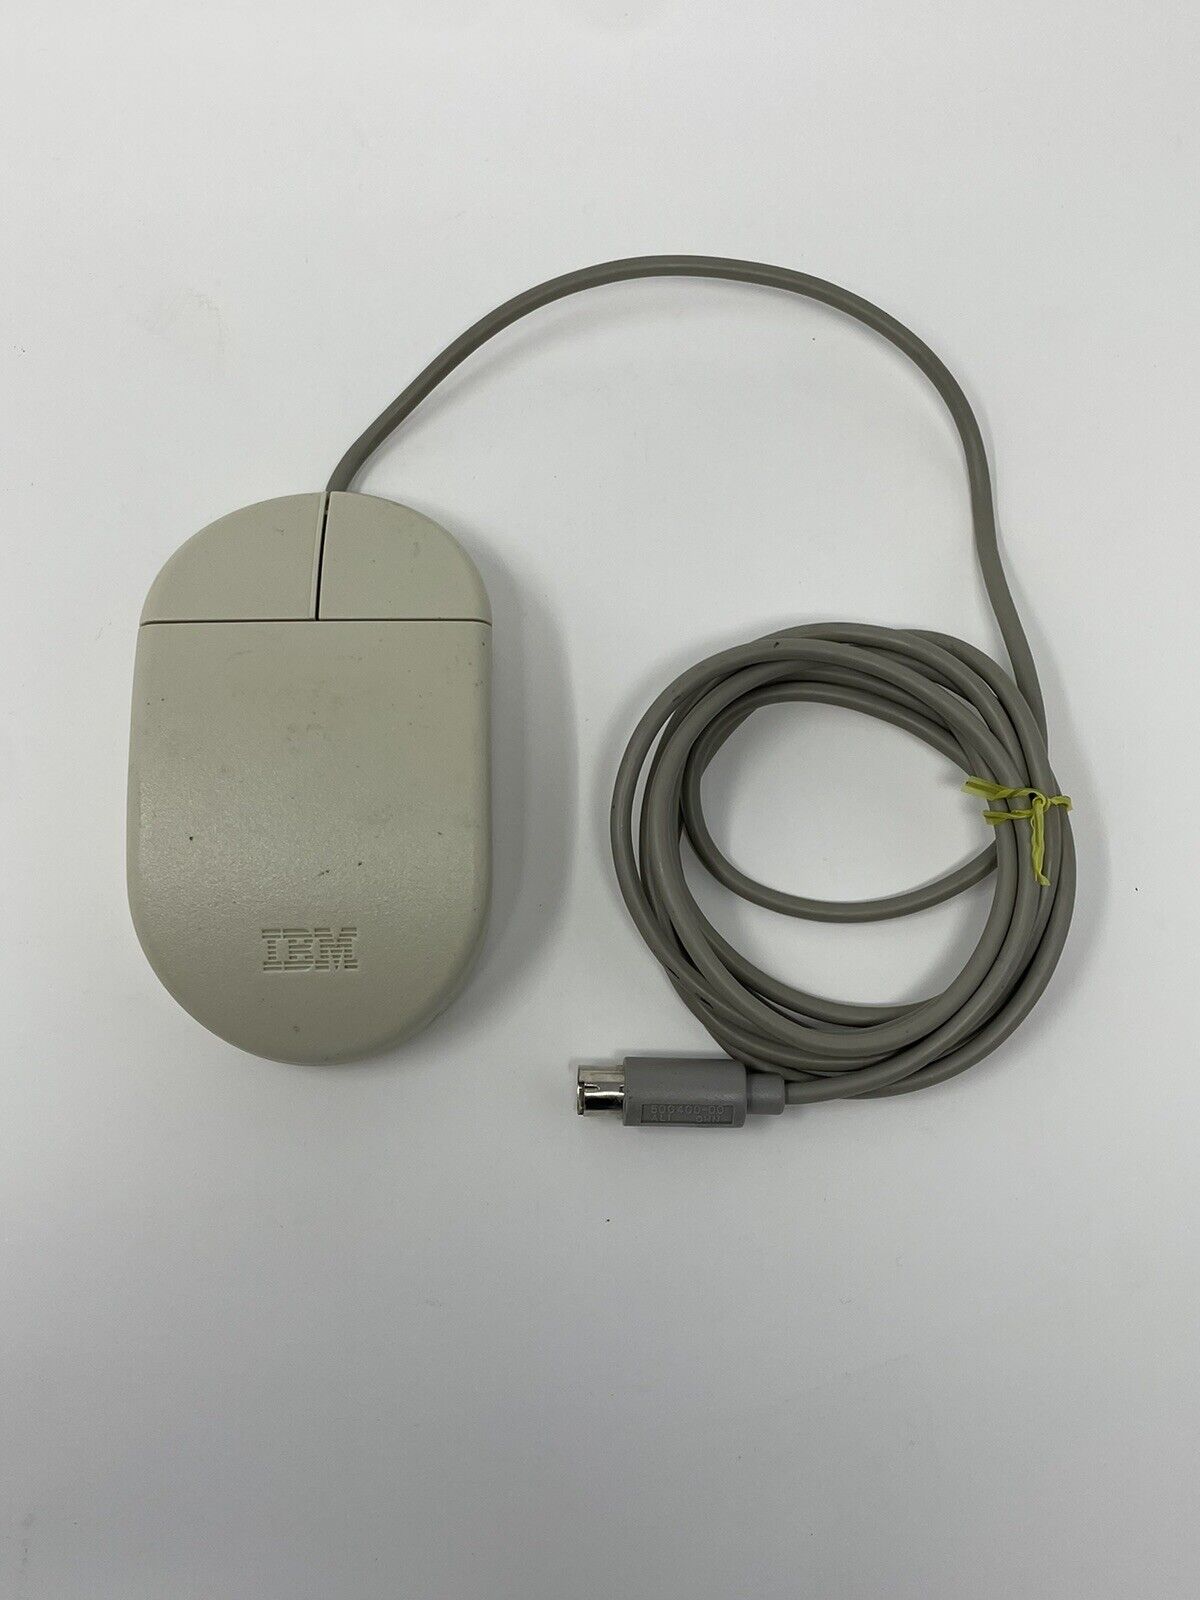 Vintage IBM 2 Button PS/2 Ball Mouse 13H6690